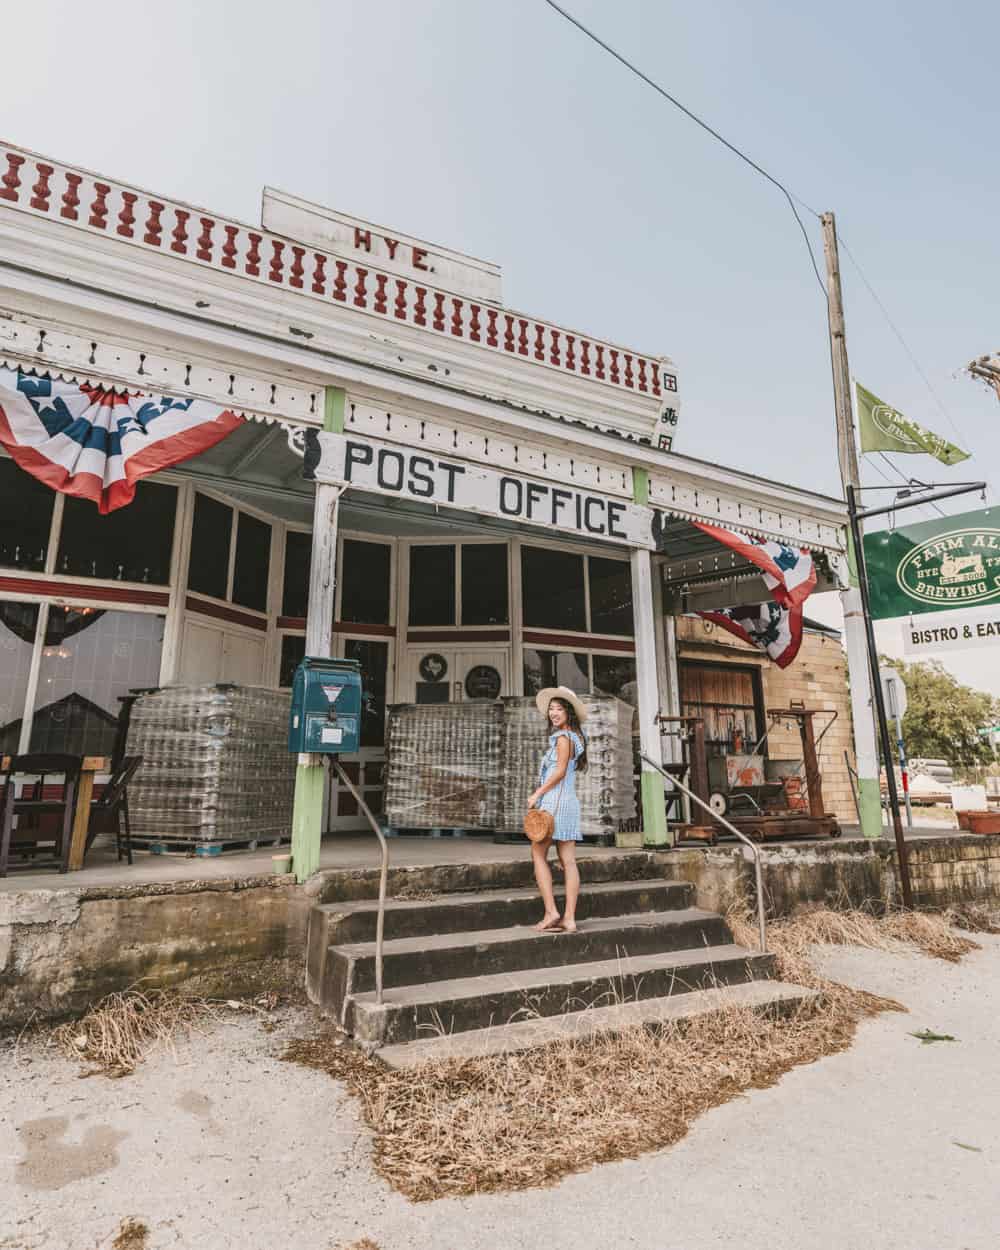 Hye General Store & Post Office in Hye Texas